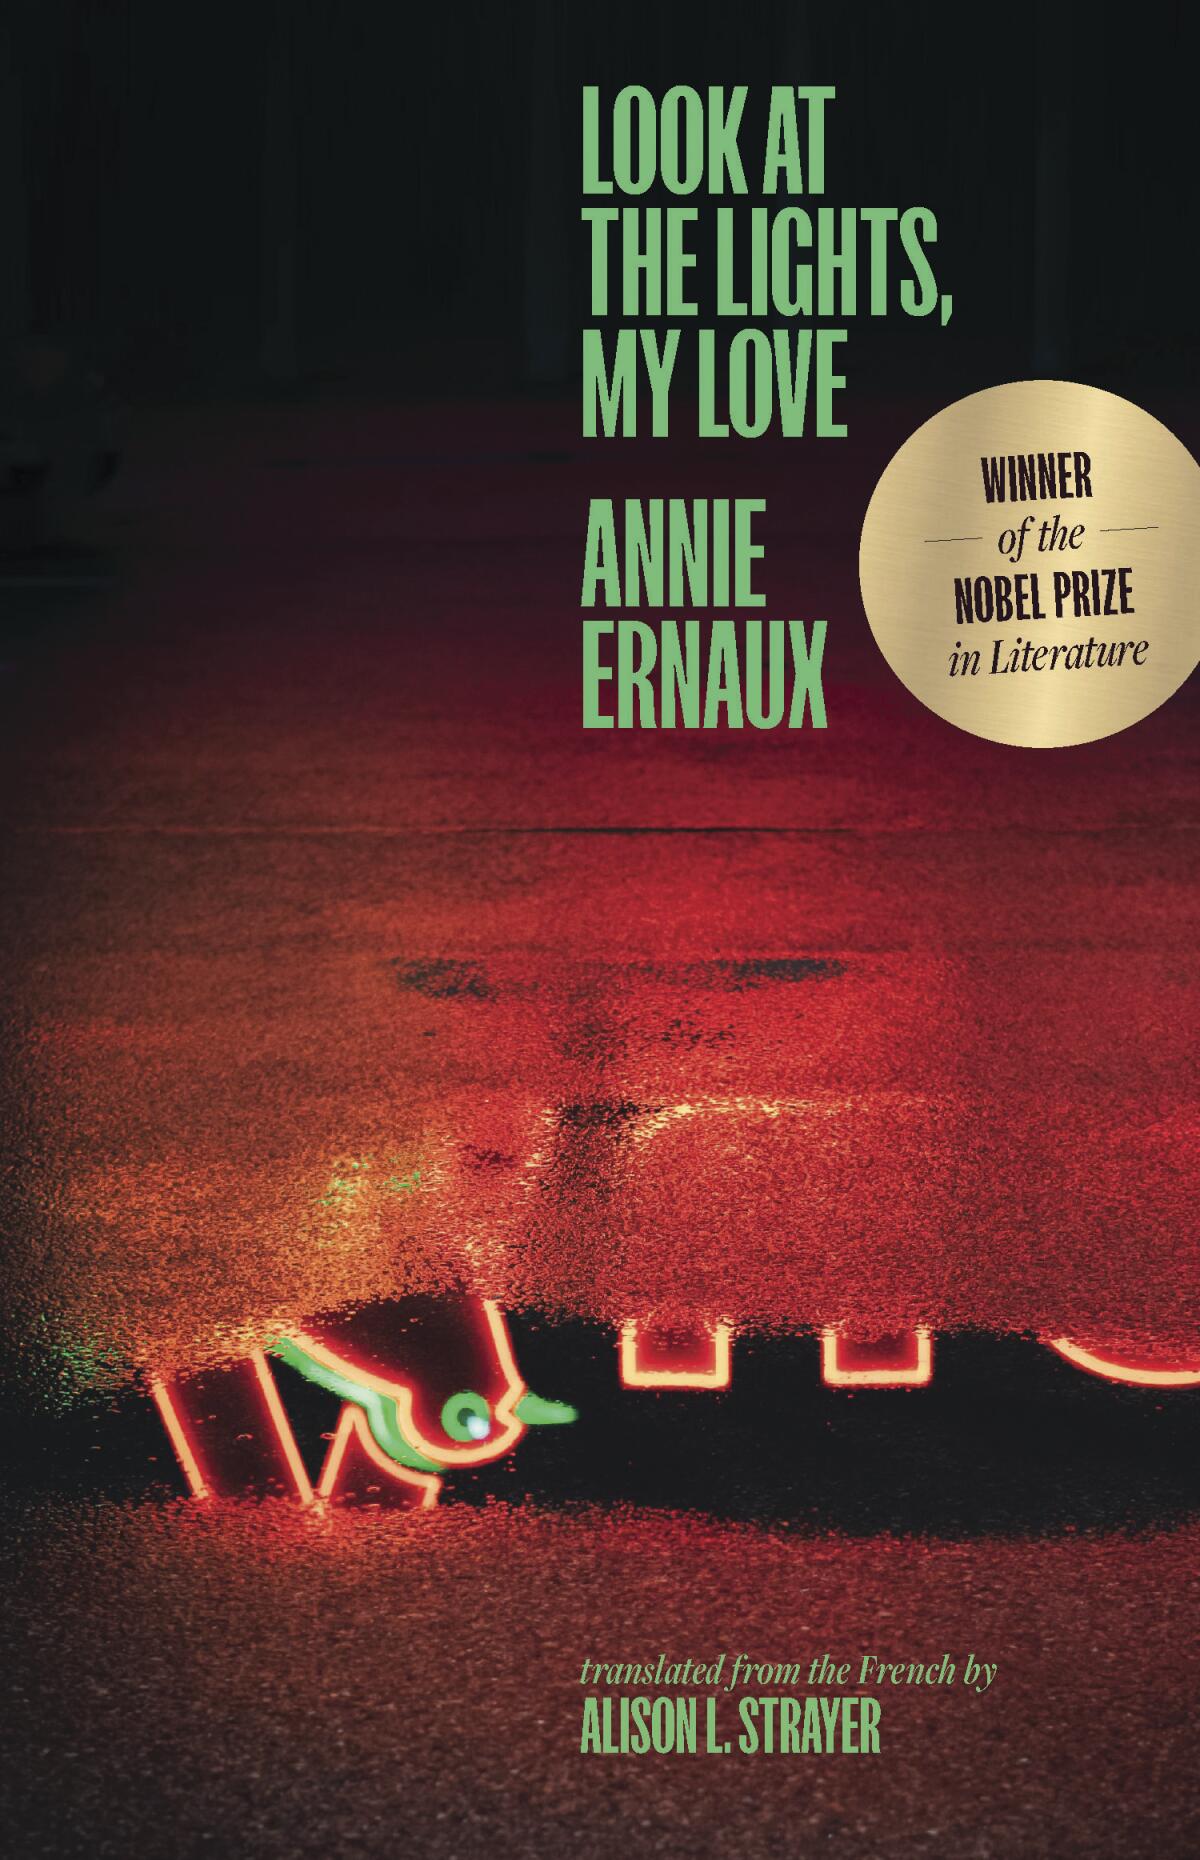 'Look at the Lights, My Love,' by Annie Ernaux